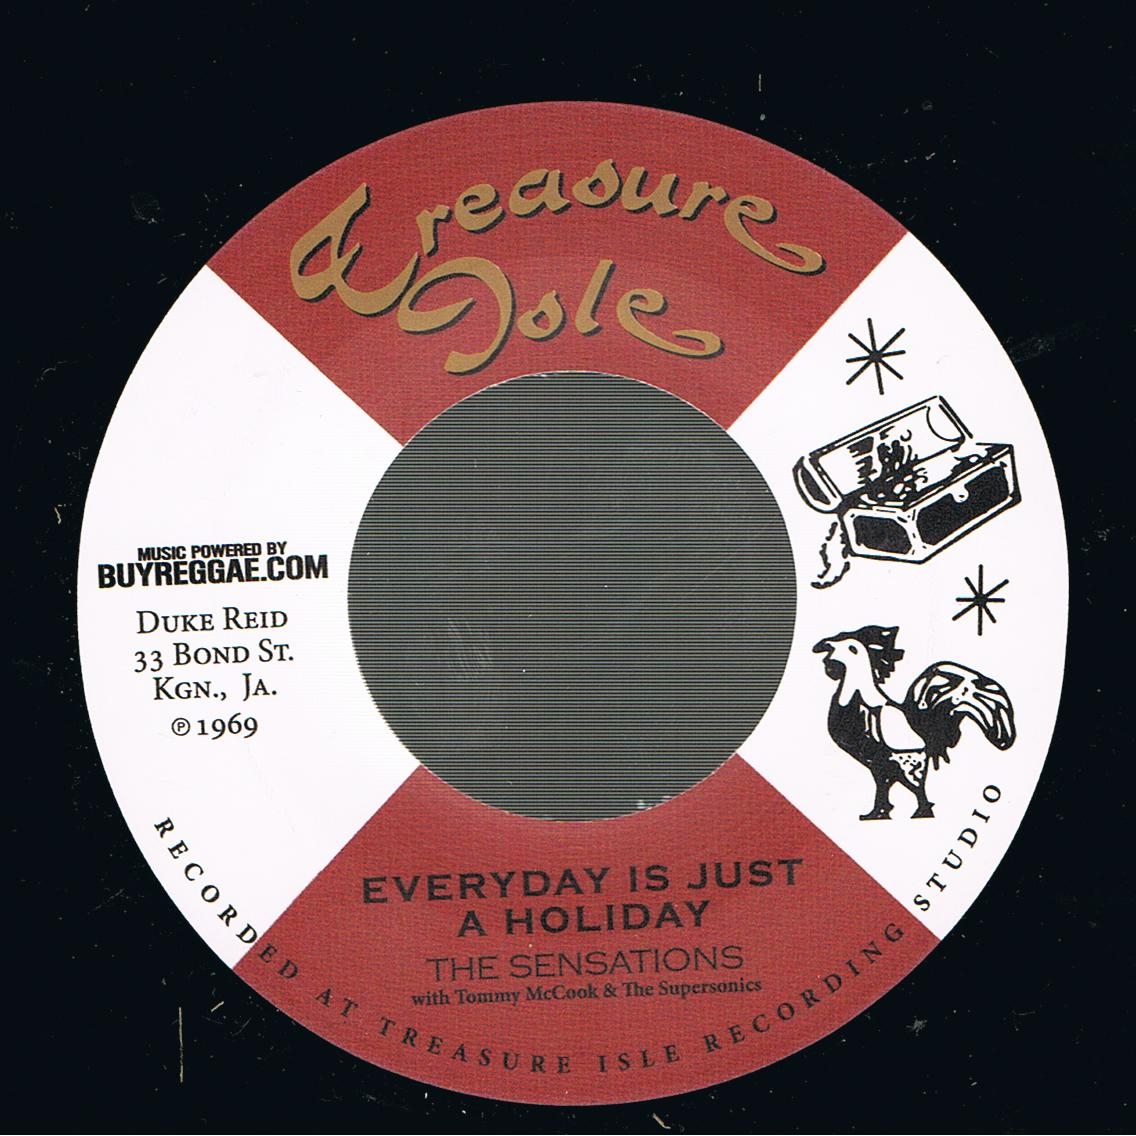 The Sensations - Every Day Is Just A Holiday / Tommy McCook - Rock Away (7")